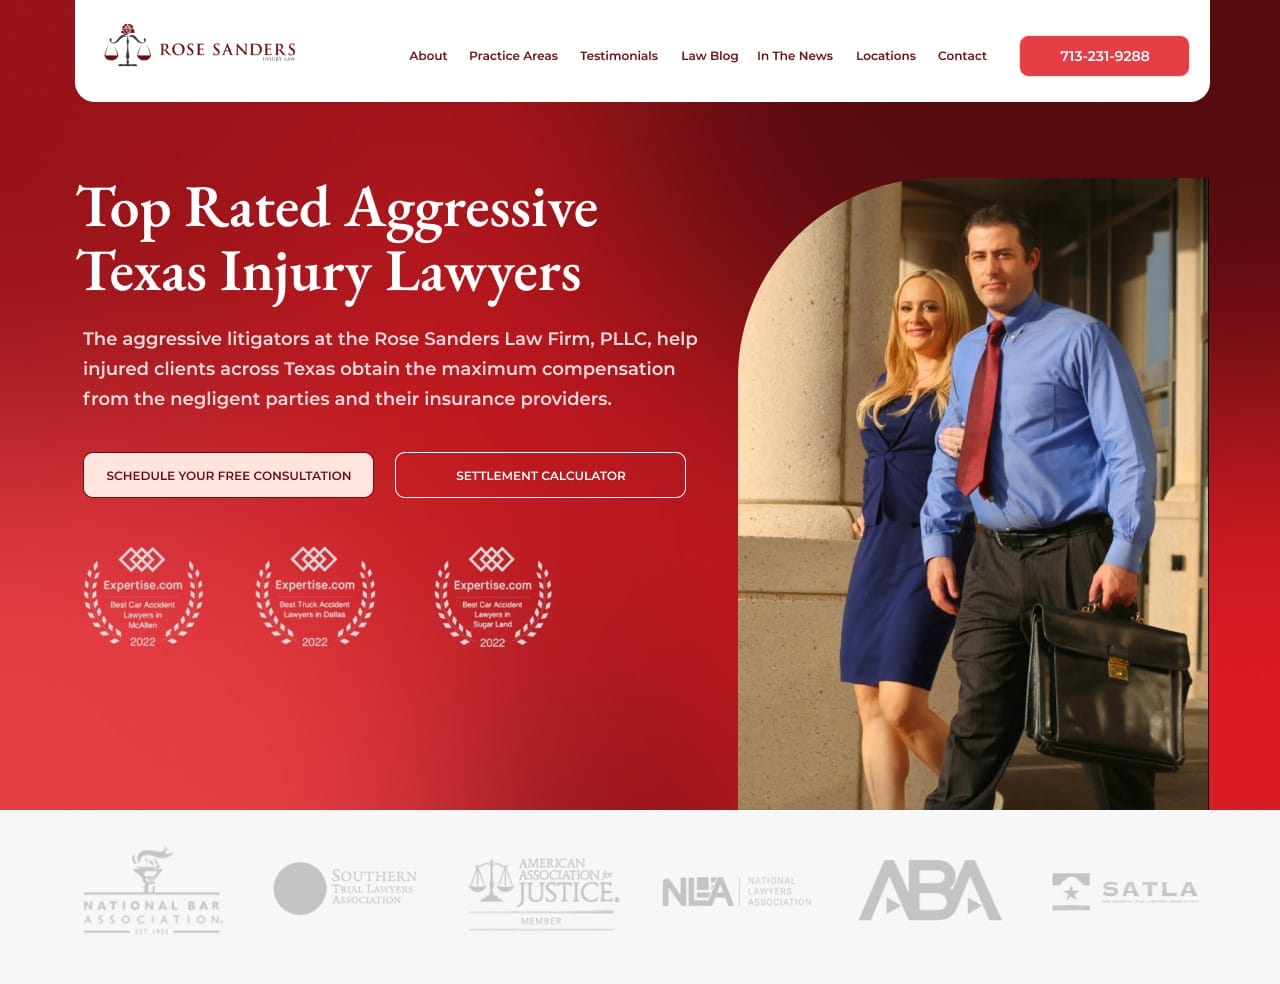 Top rated aggressive texas injury lawyers.